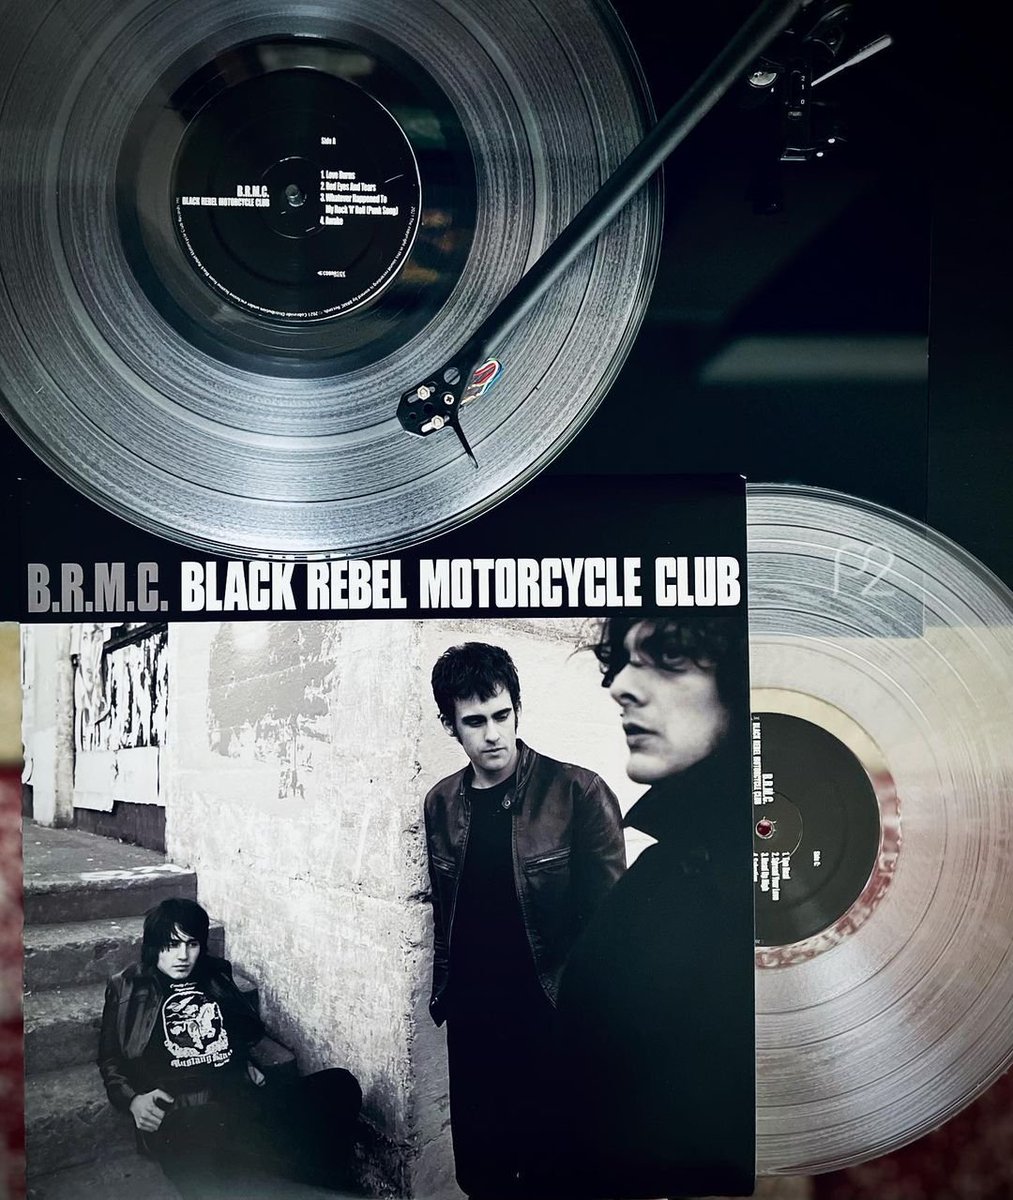 SUNDAY SOUNDTRACK + Instagram giveaway!
@BRMCofficial - BRMC

BRMC's 2001 garage/psych/rock n' roll holy grail is the perfect soundtrack to this beautiful Sunday afternoon.

Head to our Insta for a chance to win this LP!

And catch them at APF2023! Tix: bit.ly/PSYCH2023